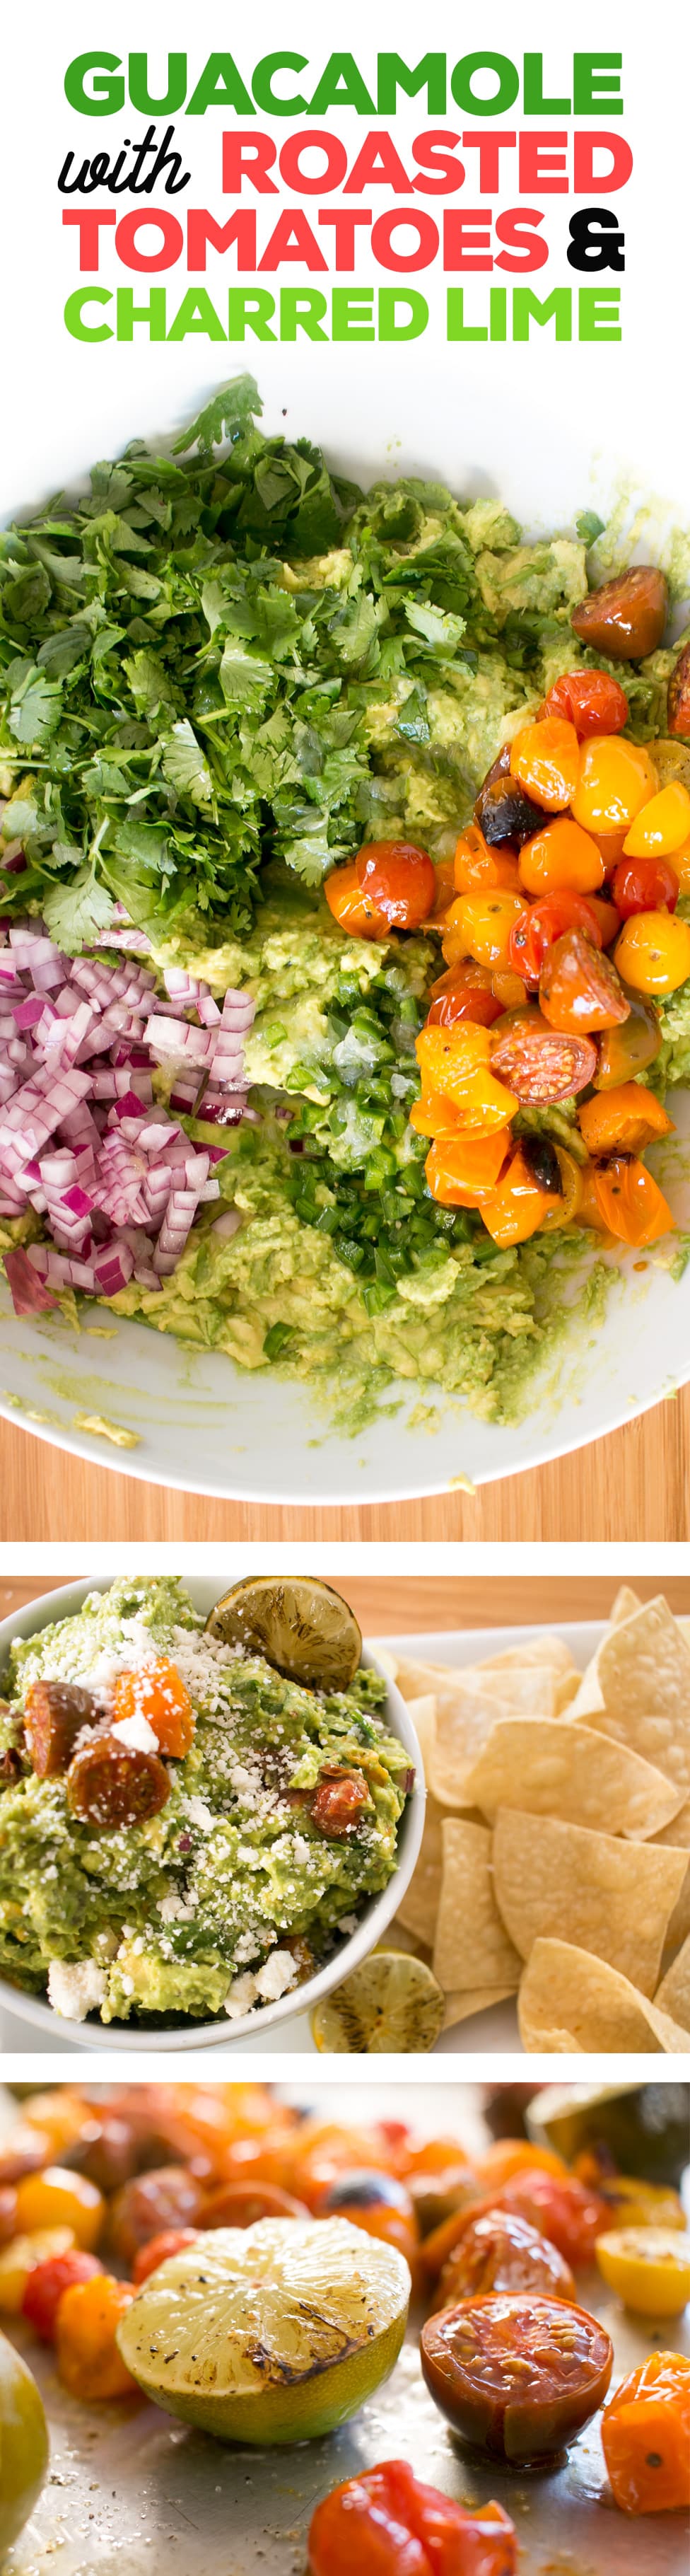 guacamole-charred-lime-roasted-tomatoes_pin